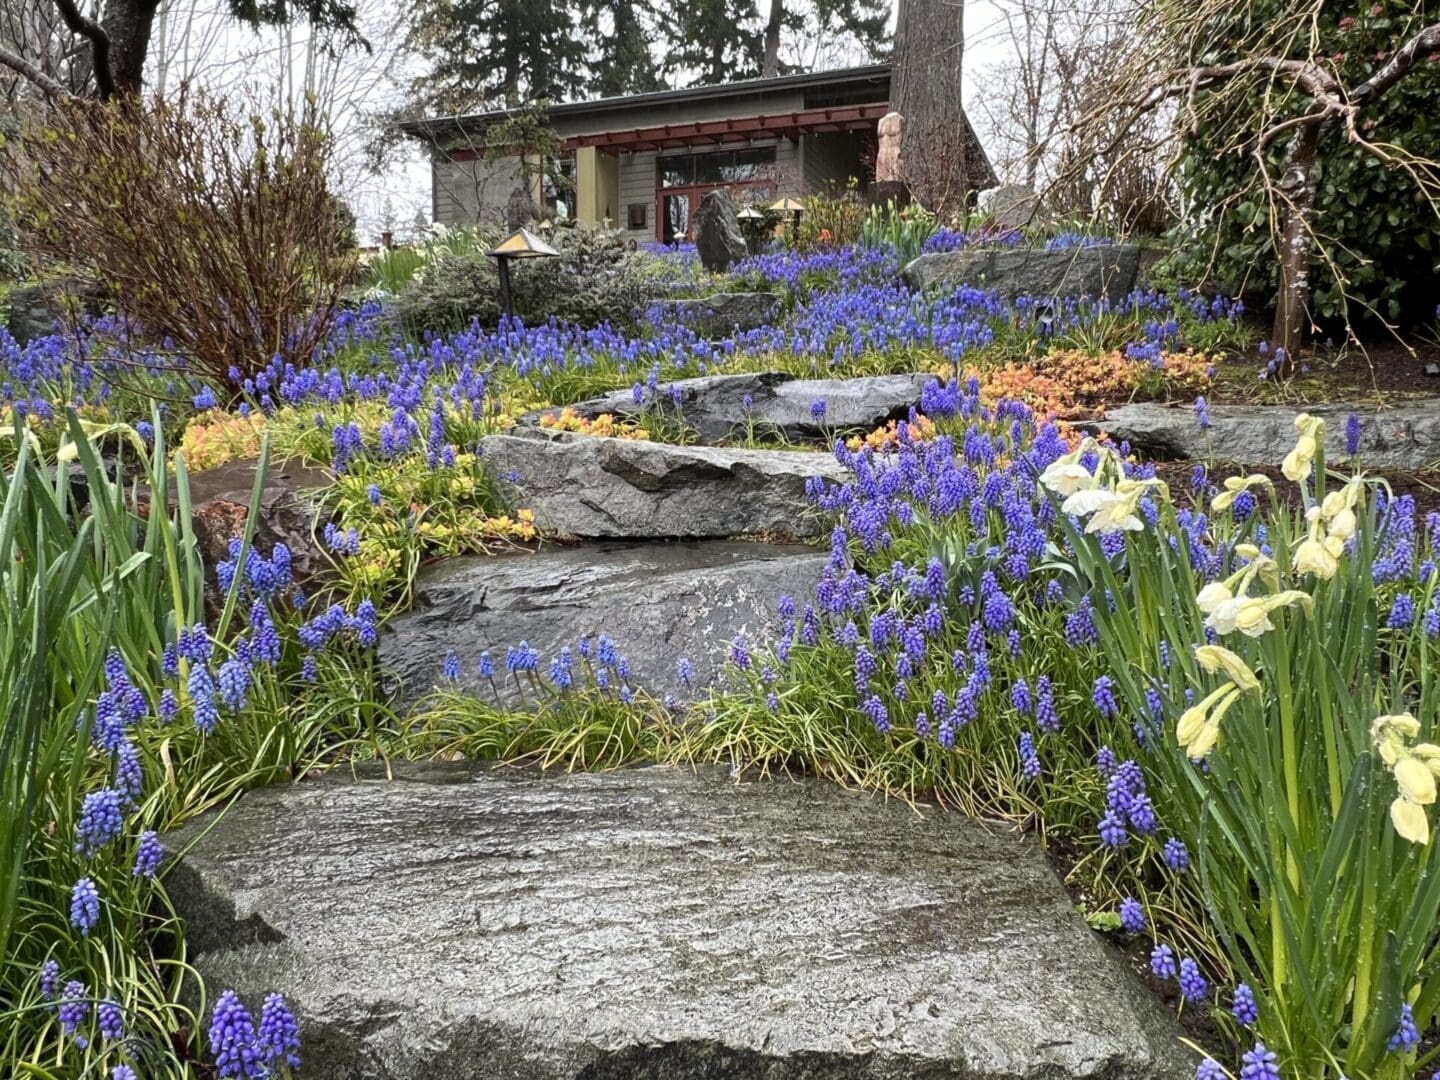 A garden with purple flowers and rocks in the foreground.